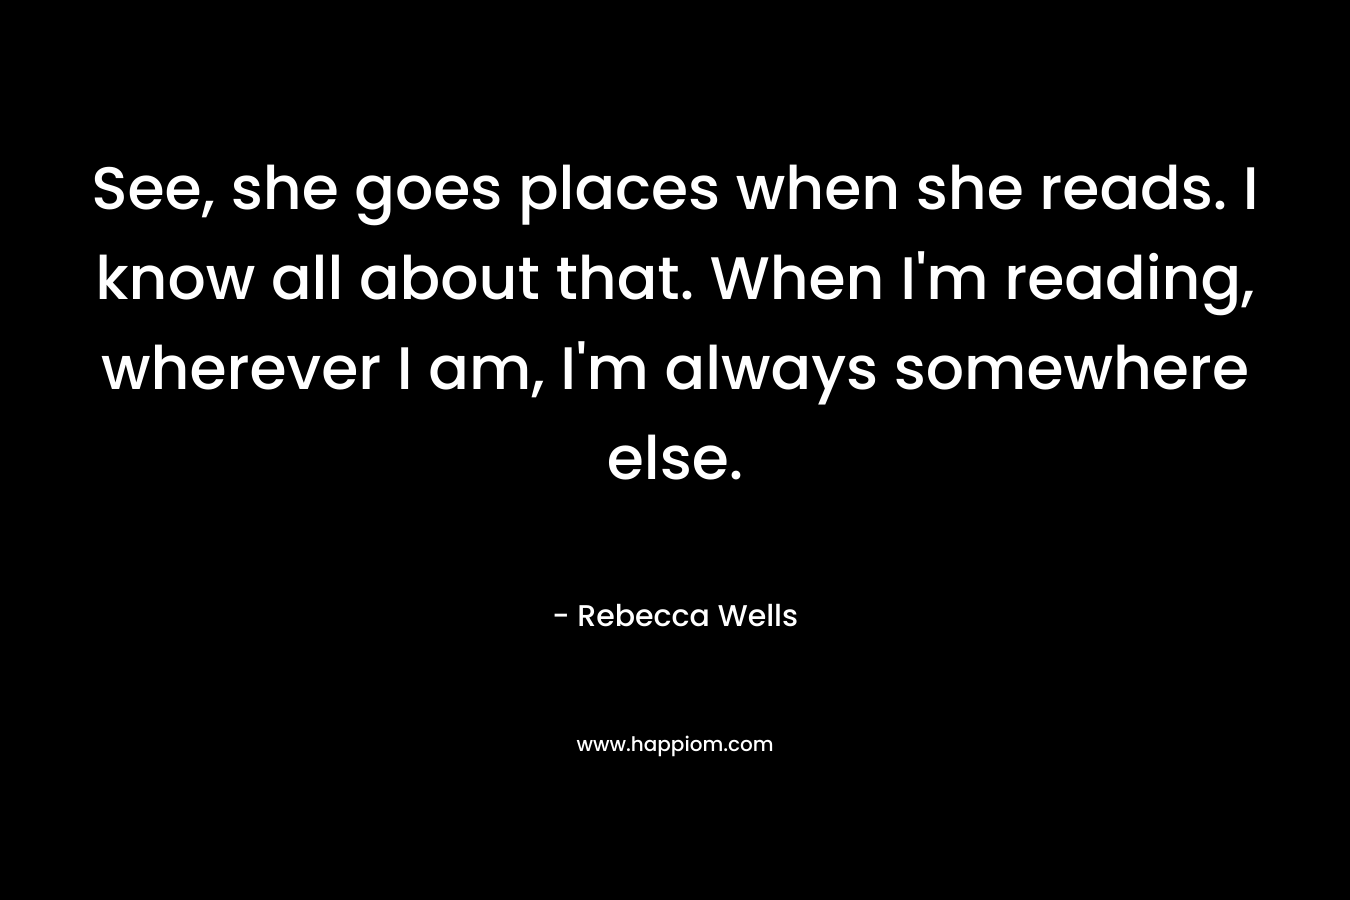 See, she goes places when she reads. I know all about that. When I’m reading, wherever I am, I’m always somewhere else. – Rebecca Wells